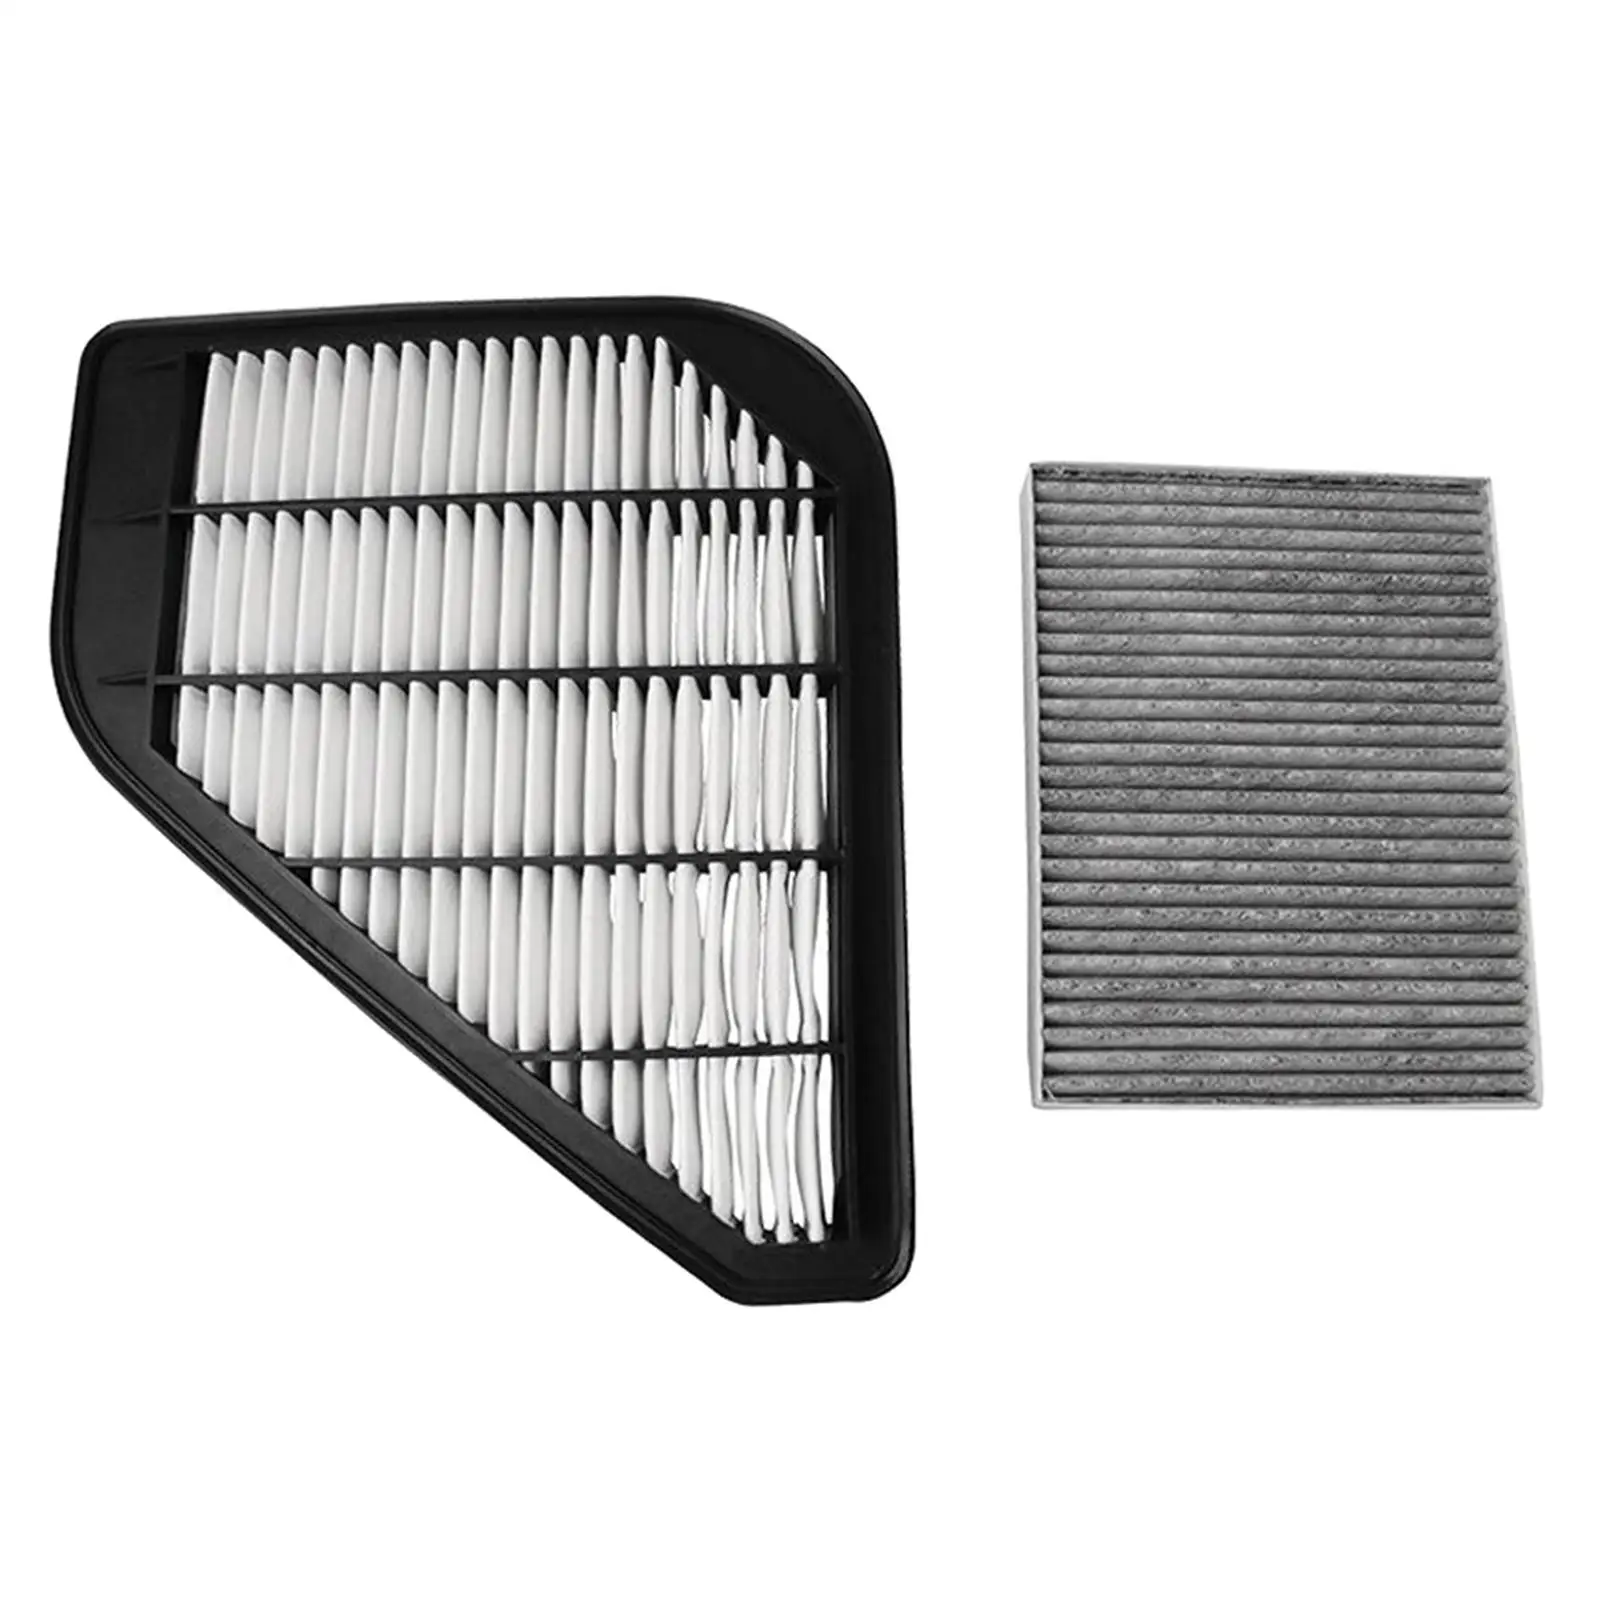 Engine and Cabin Air Filter Kit 19390767 SUitable for Buick for Chevrolet for Gmc and Other Models